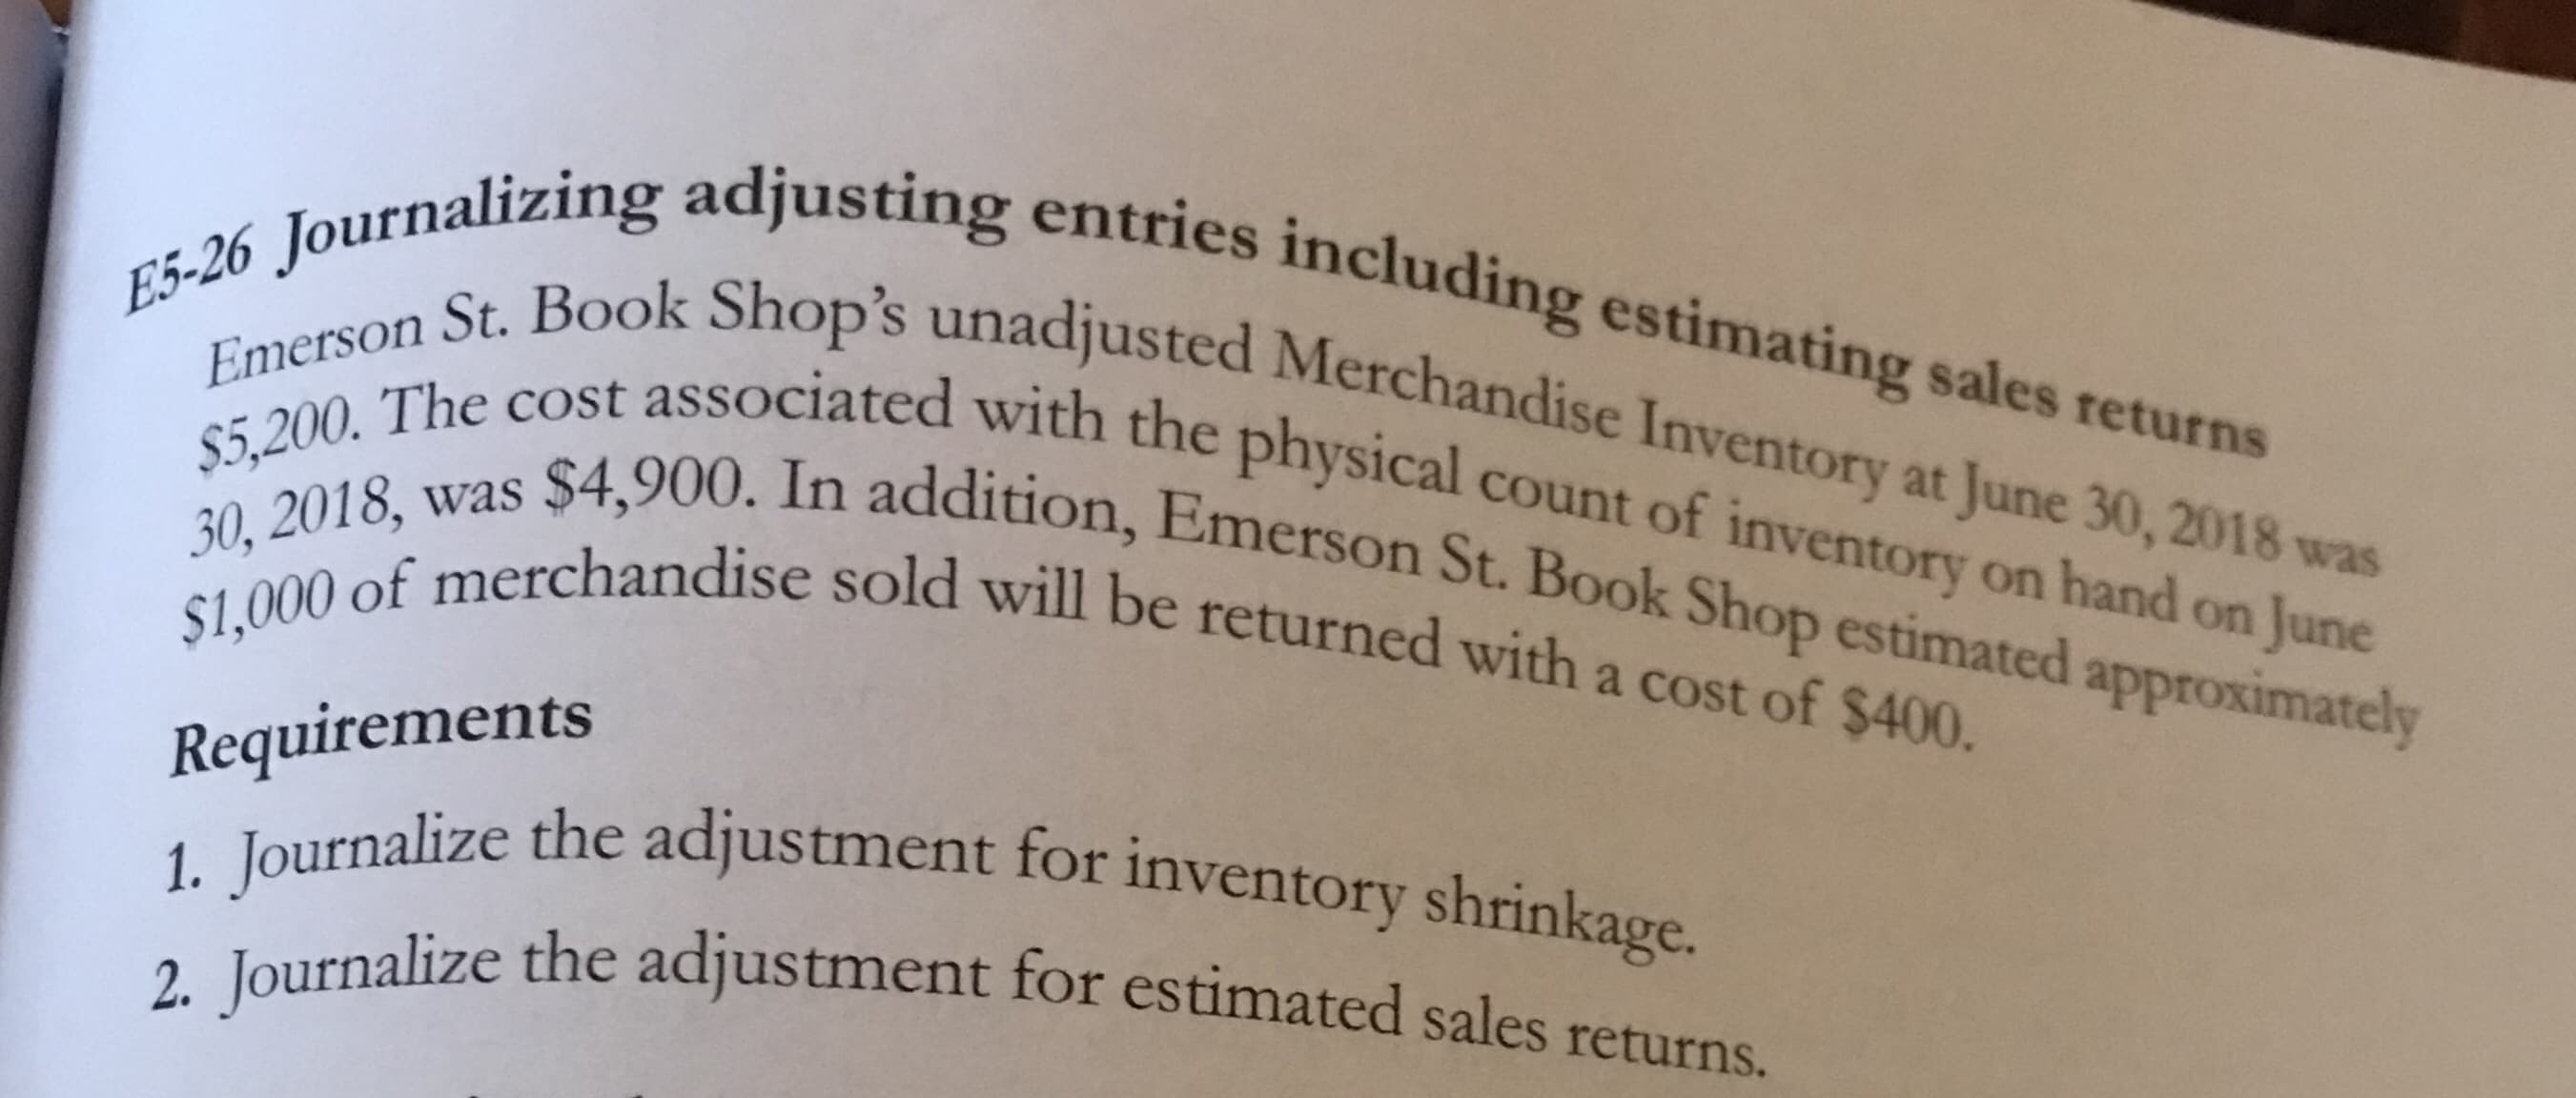 1. Journalize the adjustment for inventory shrinkage.
2. Journalize the adjustment for estimated sales returns.
